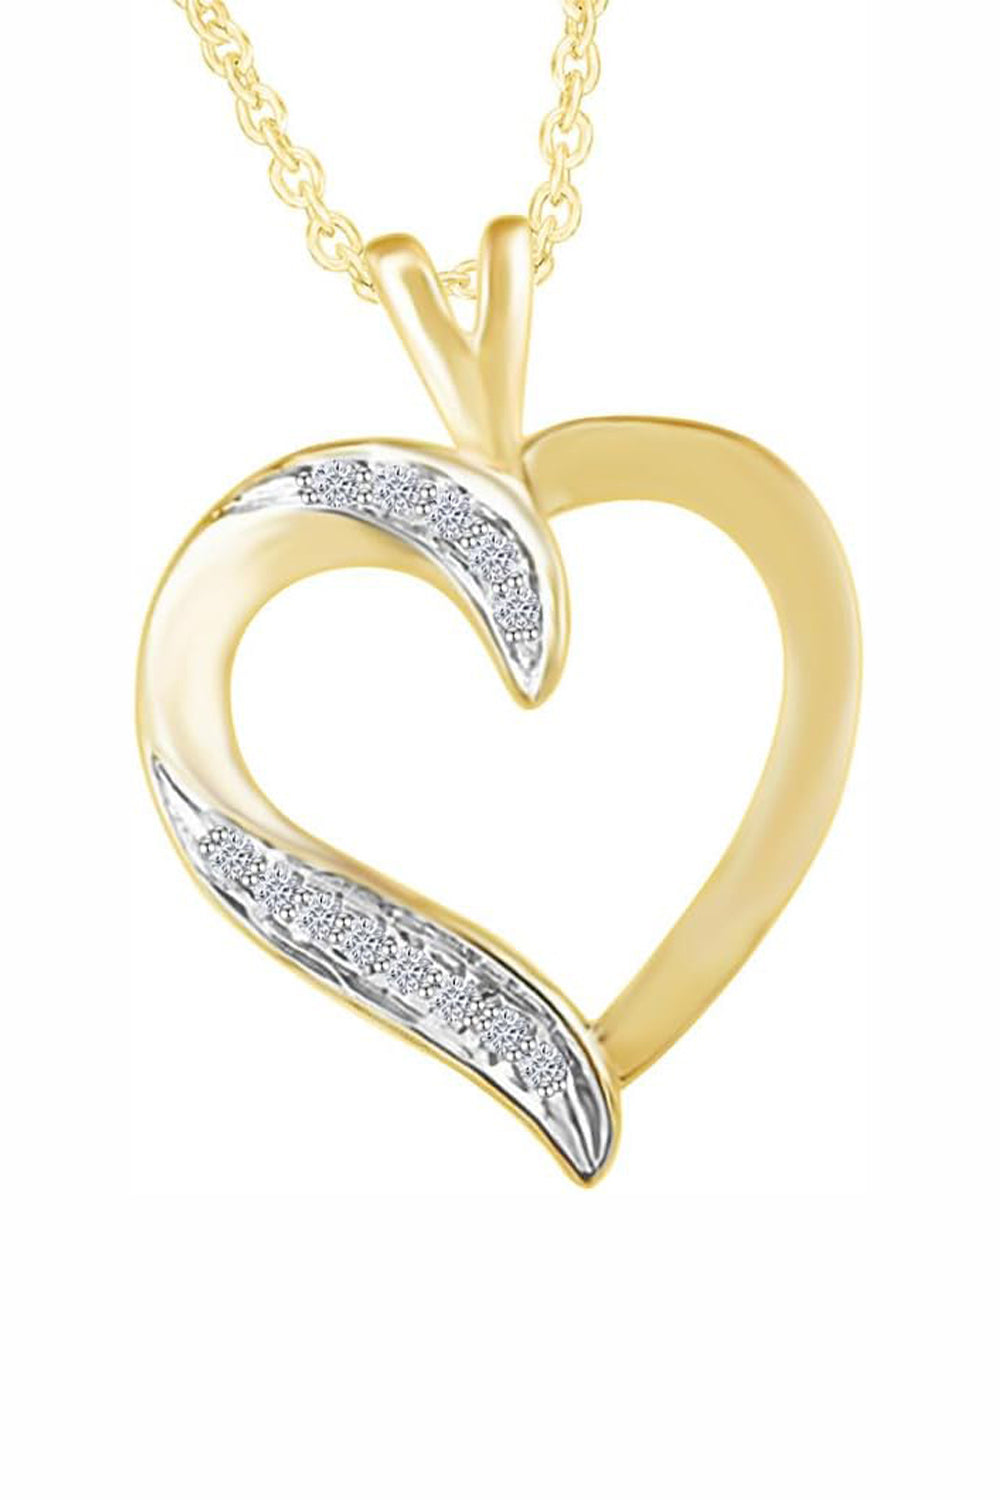 Moissanite Heart Pendant Necklace for Women Lab Created Diamond D Color VVS1 18k Gold Plated Sterling Silver